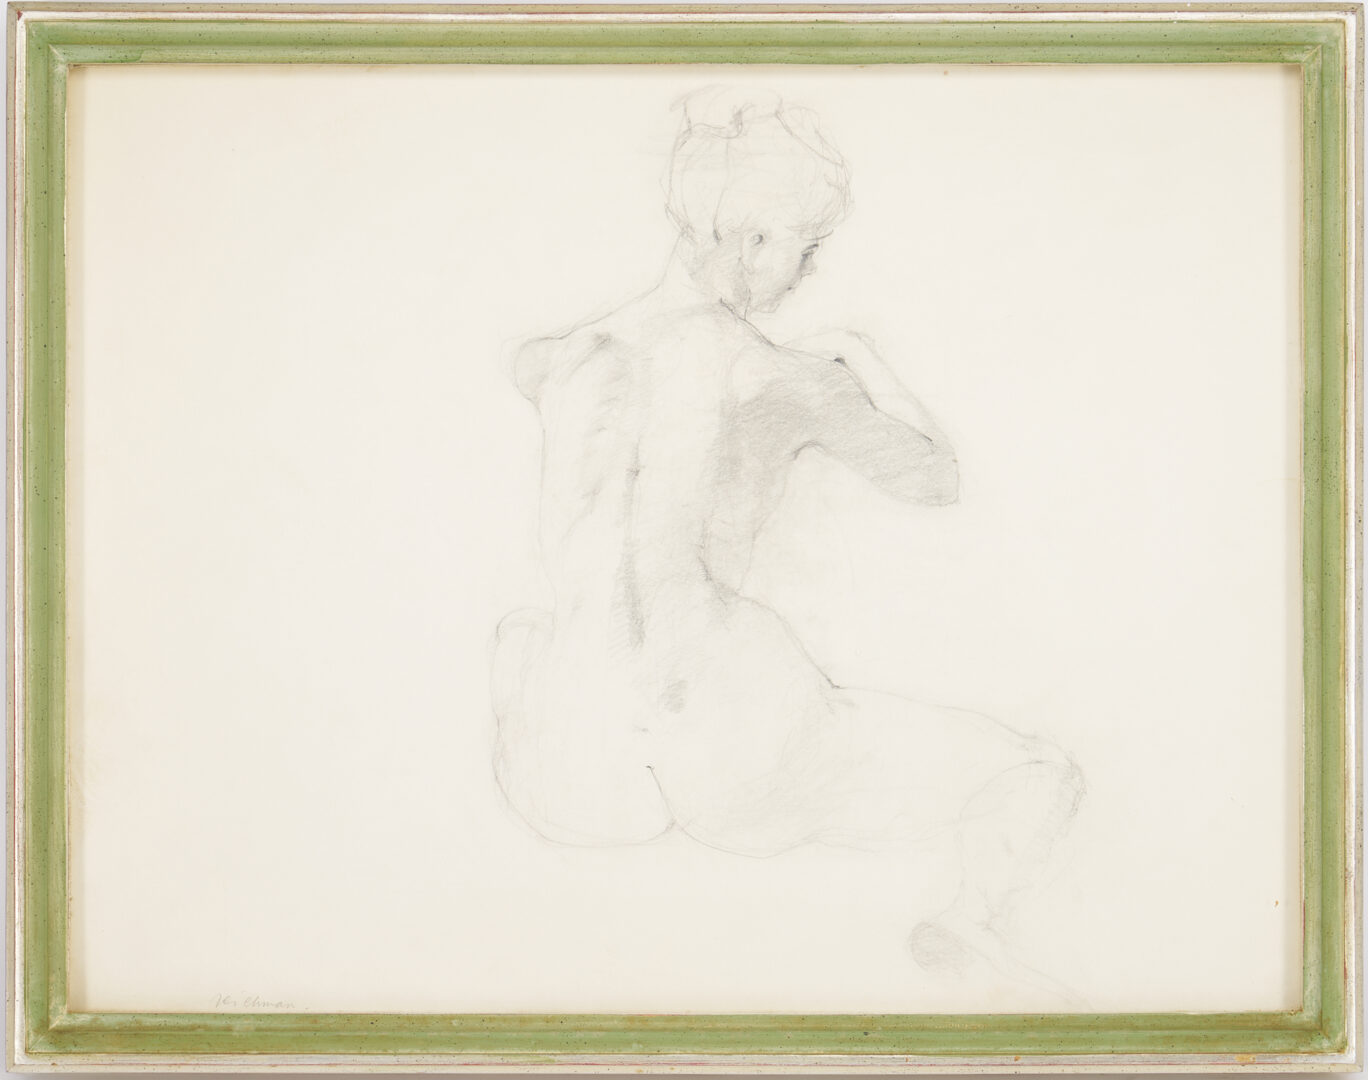 Lot 847: 3 Works on Paper incl. Seymour Leichman, ex-DuBose Gallery, Houston, Texas